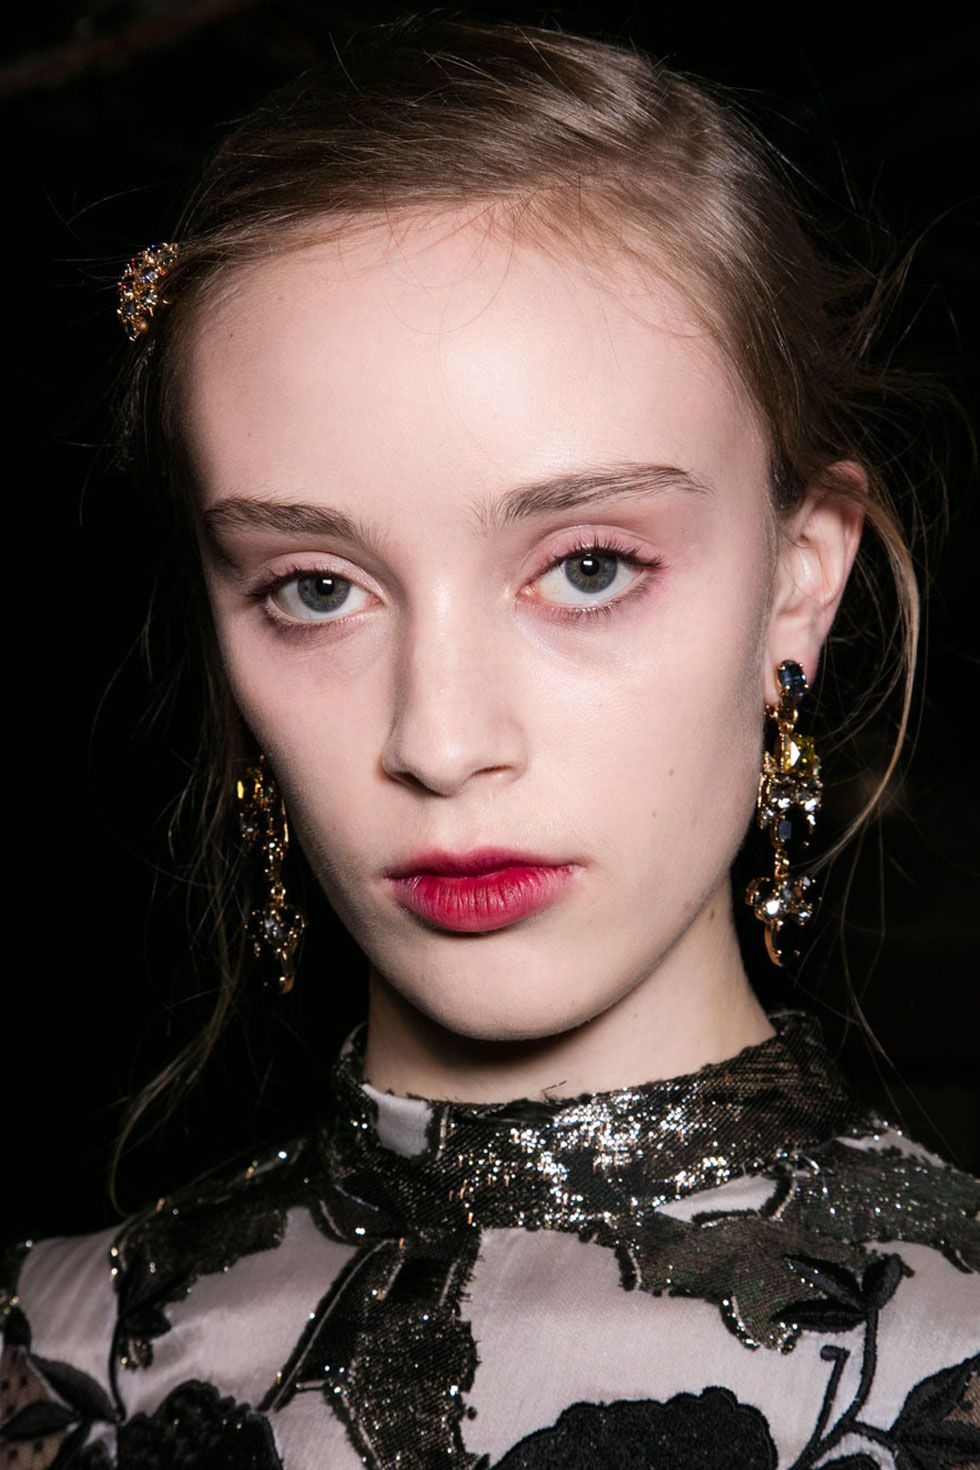 <p>"Nobody's going to go out with a graphic neon eyeliner that goes all the way up to your eyebrow," Teasdale says, "But if you dare to experiment, you'll find that a lot of those electric neon colors actually look really nice as a color wash on your lids, or as a cat-eye."</p><p>Erdem must have psychically beamed himself into our conversation—his models had sheer neon lids that made a sublime contrast to their ivory lace dresses.</p>